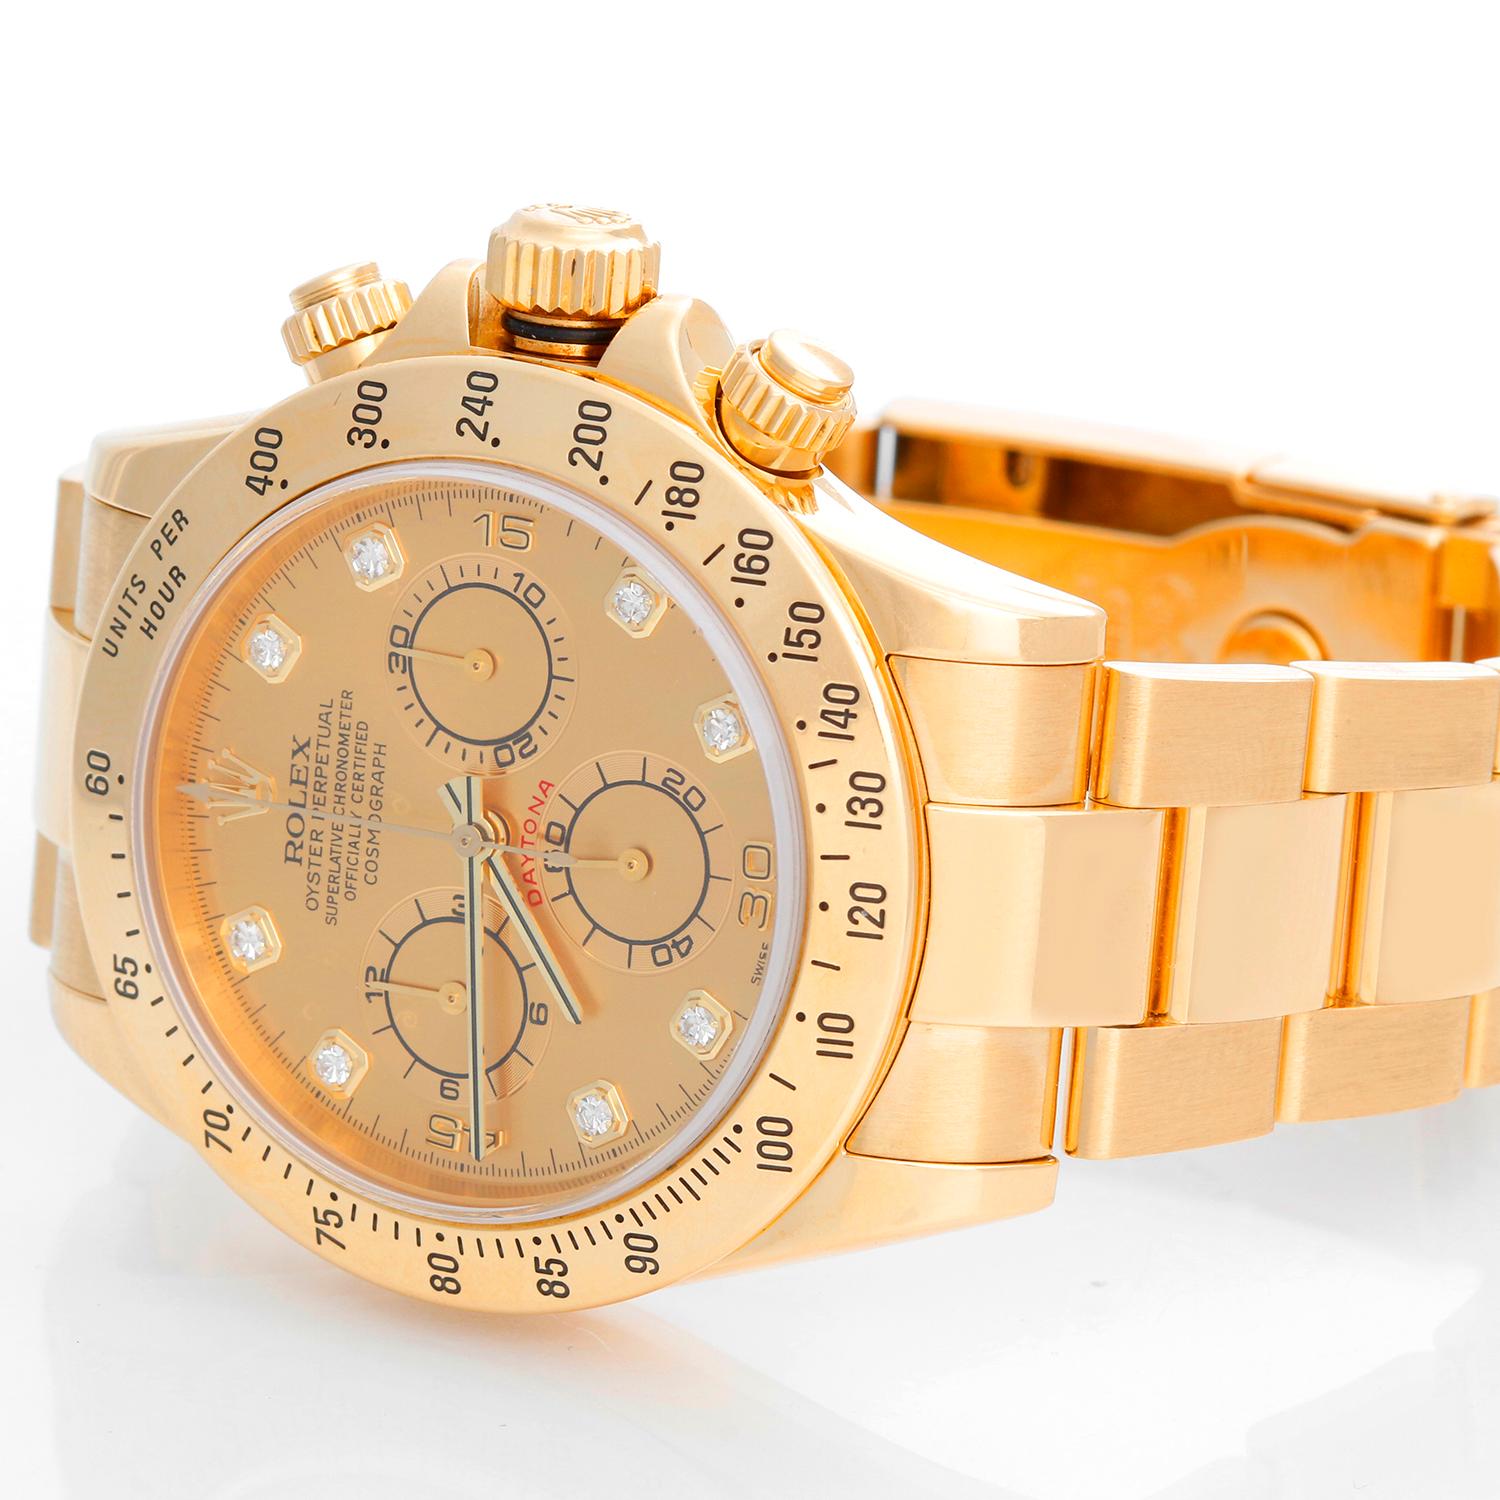 Rolex Cosmograph Daytona Men's Watch 116528 - Automatic winding, chronograph, 44 jewels, sapphire crystal. 18k yellow gold case and bezel  . Champagne dial with luminous-type markers and subdials. 18k yellow gold Oyster bracelet with flip-lock